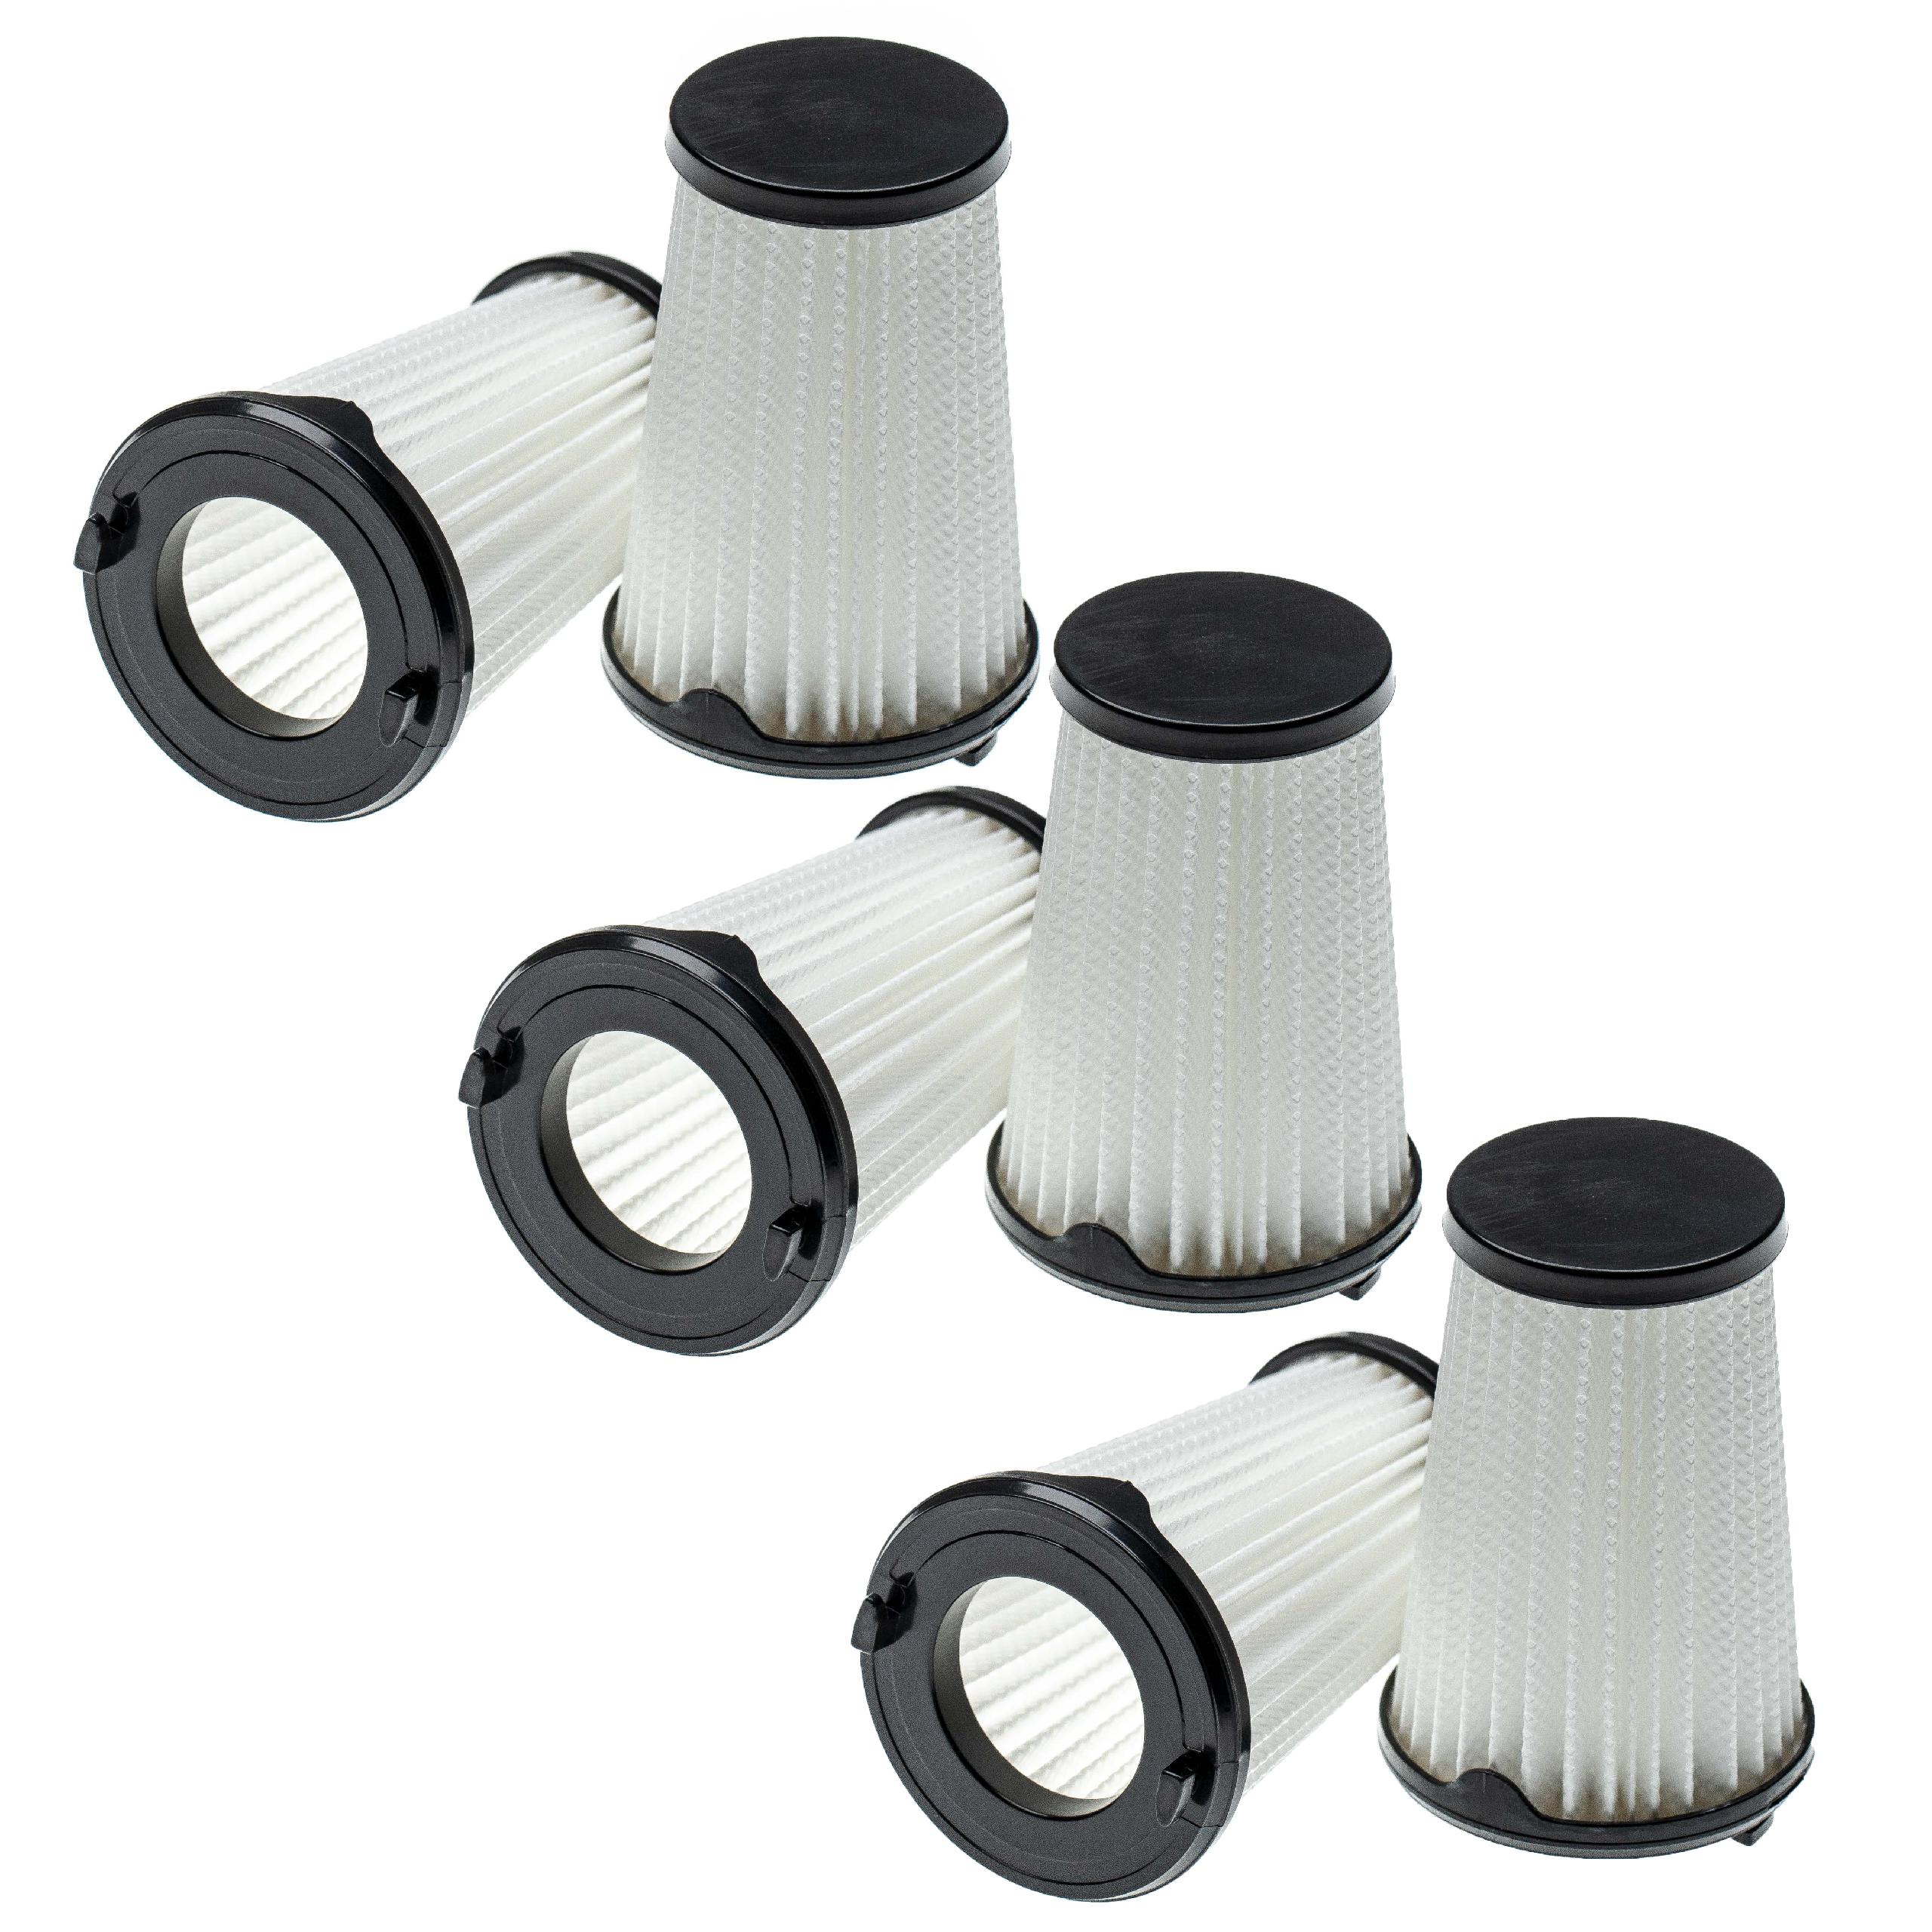 6x pleated filter replaces AEG AEF150, 9001683755, 90094073100 for ElectroluxVacuum Cleaner, black / white